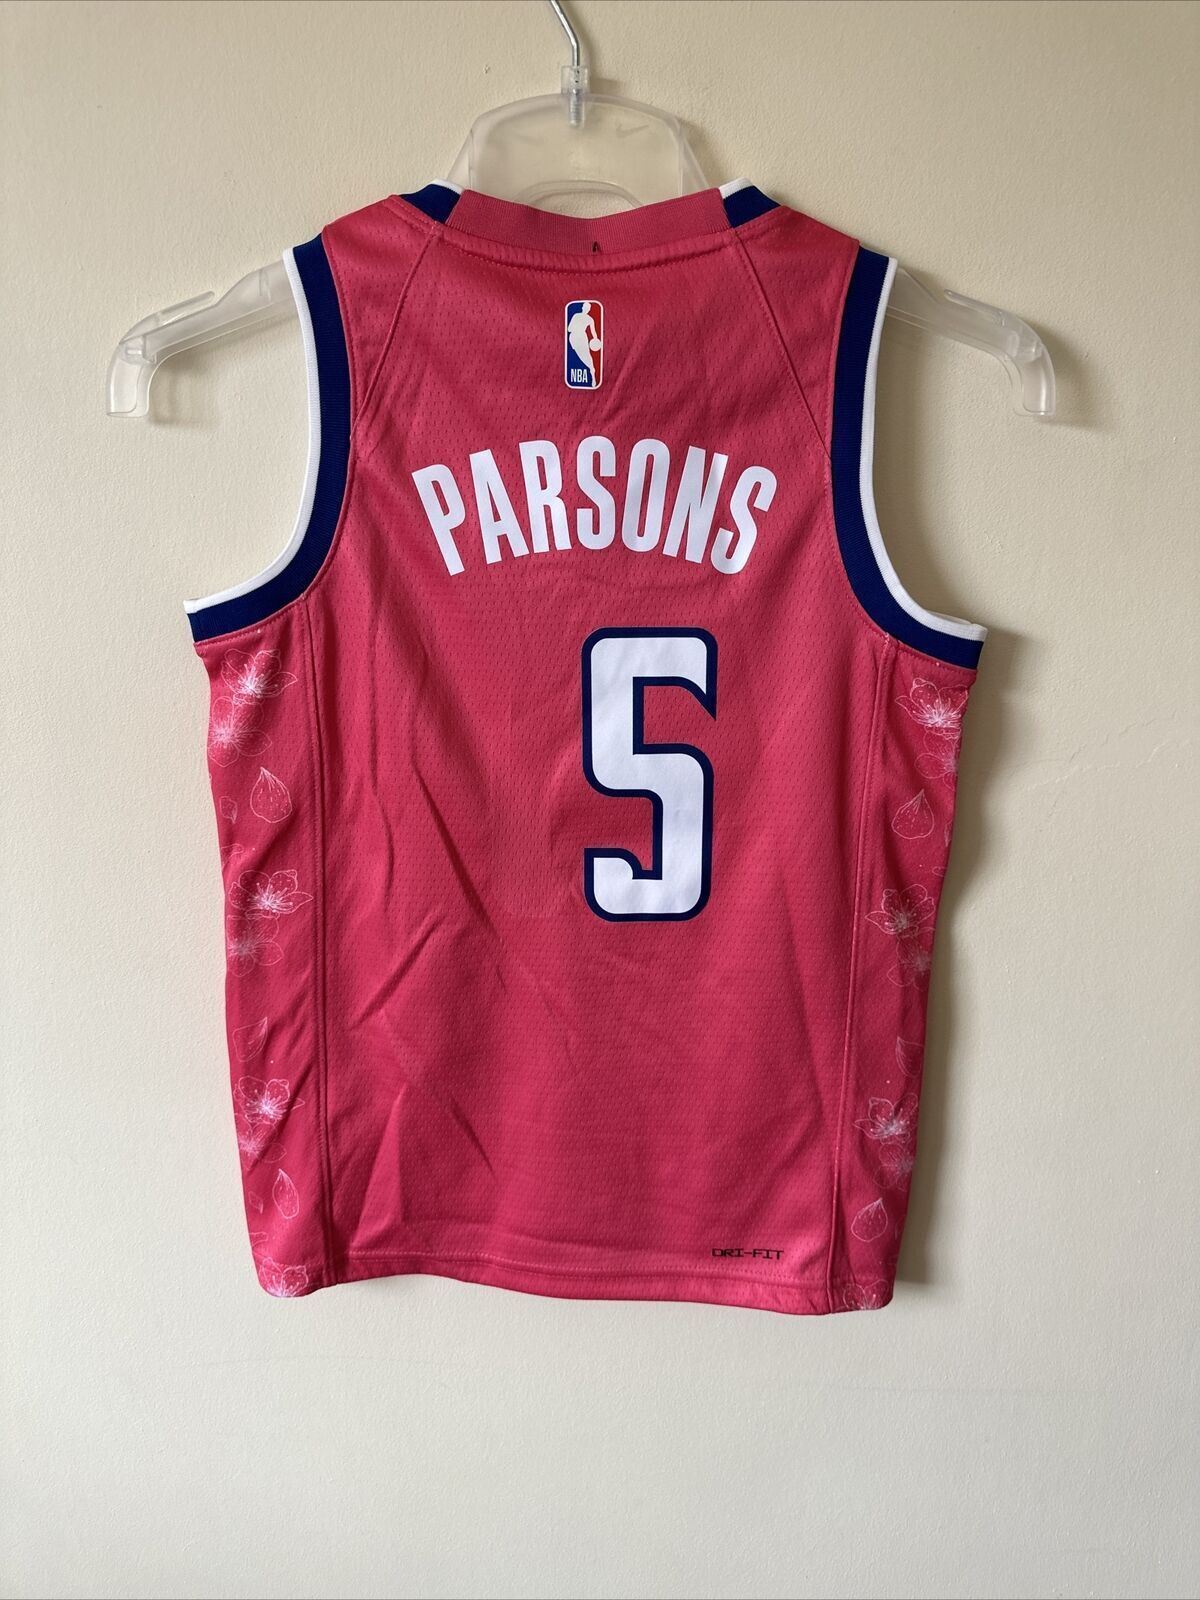 Nike NBA Washington Wizards City Edition Jersey PARSONS 15 Youth 8-10 Years *DF